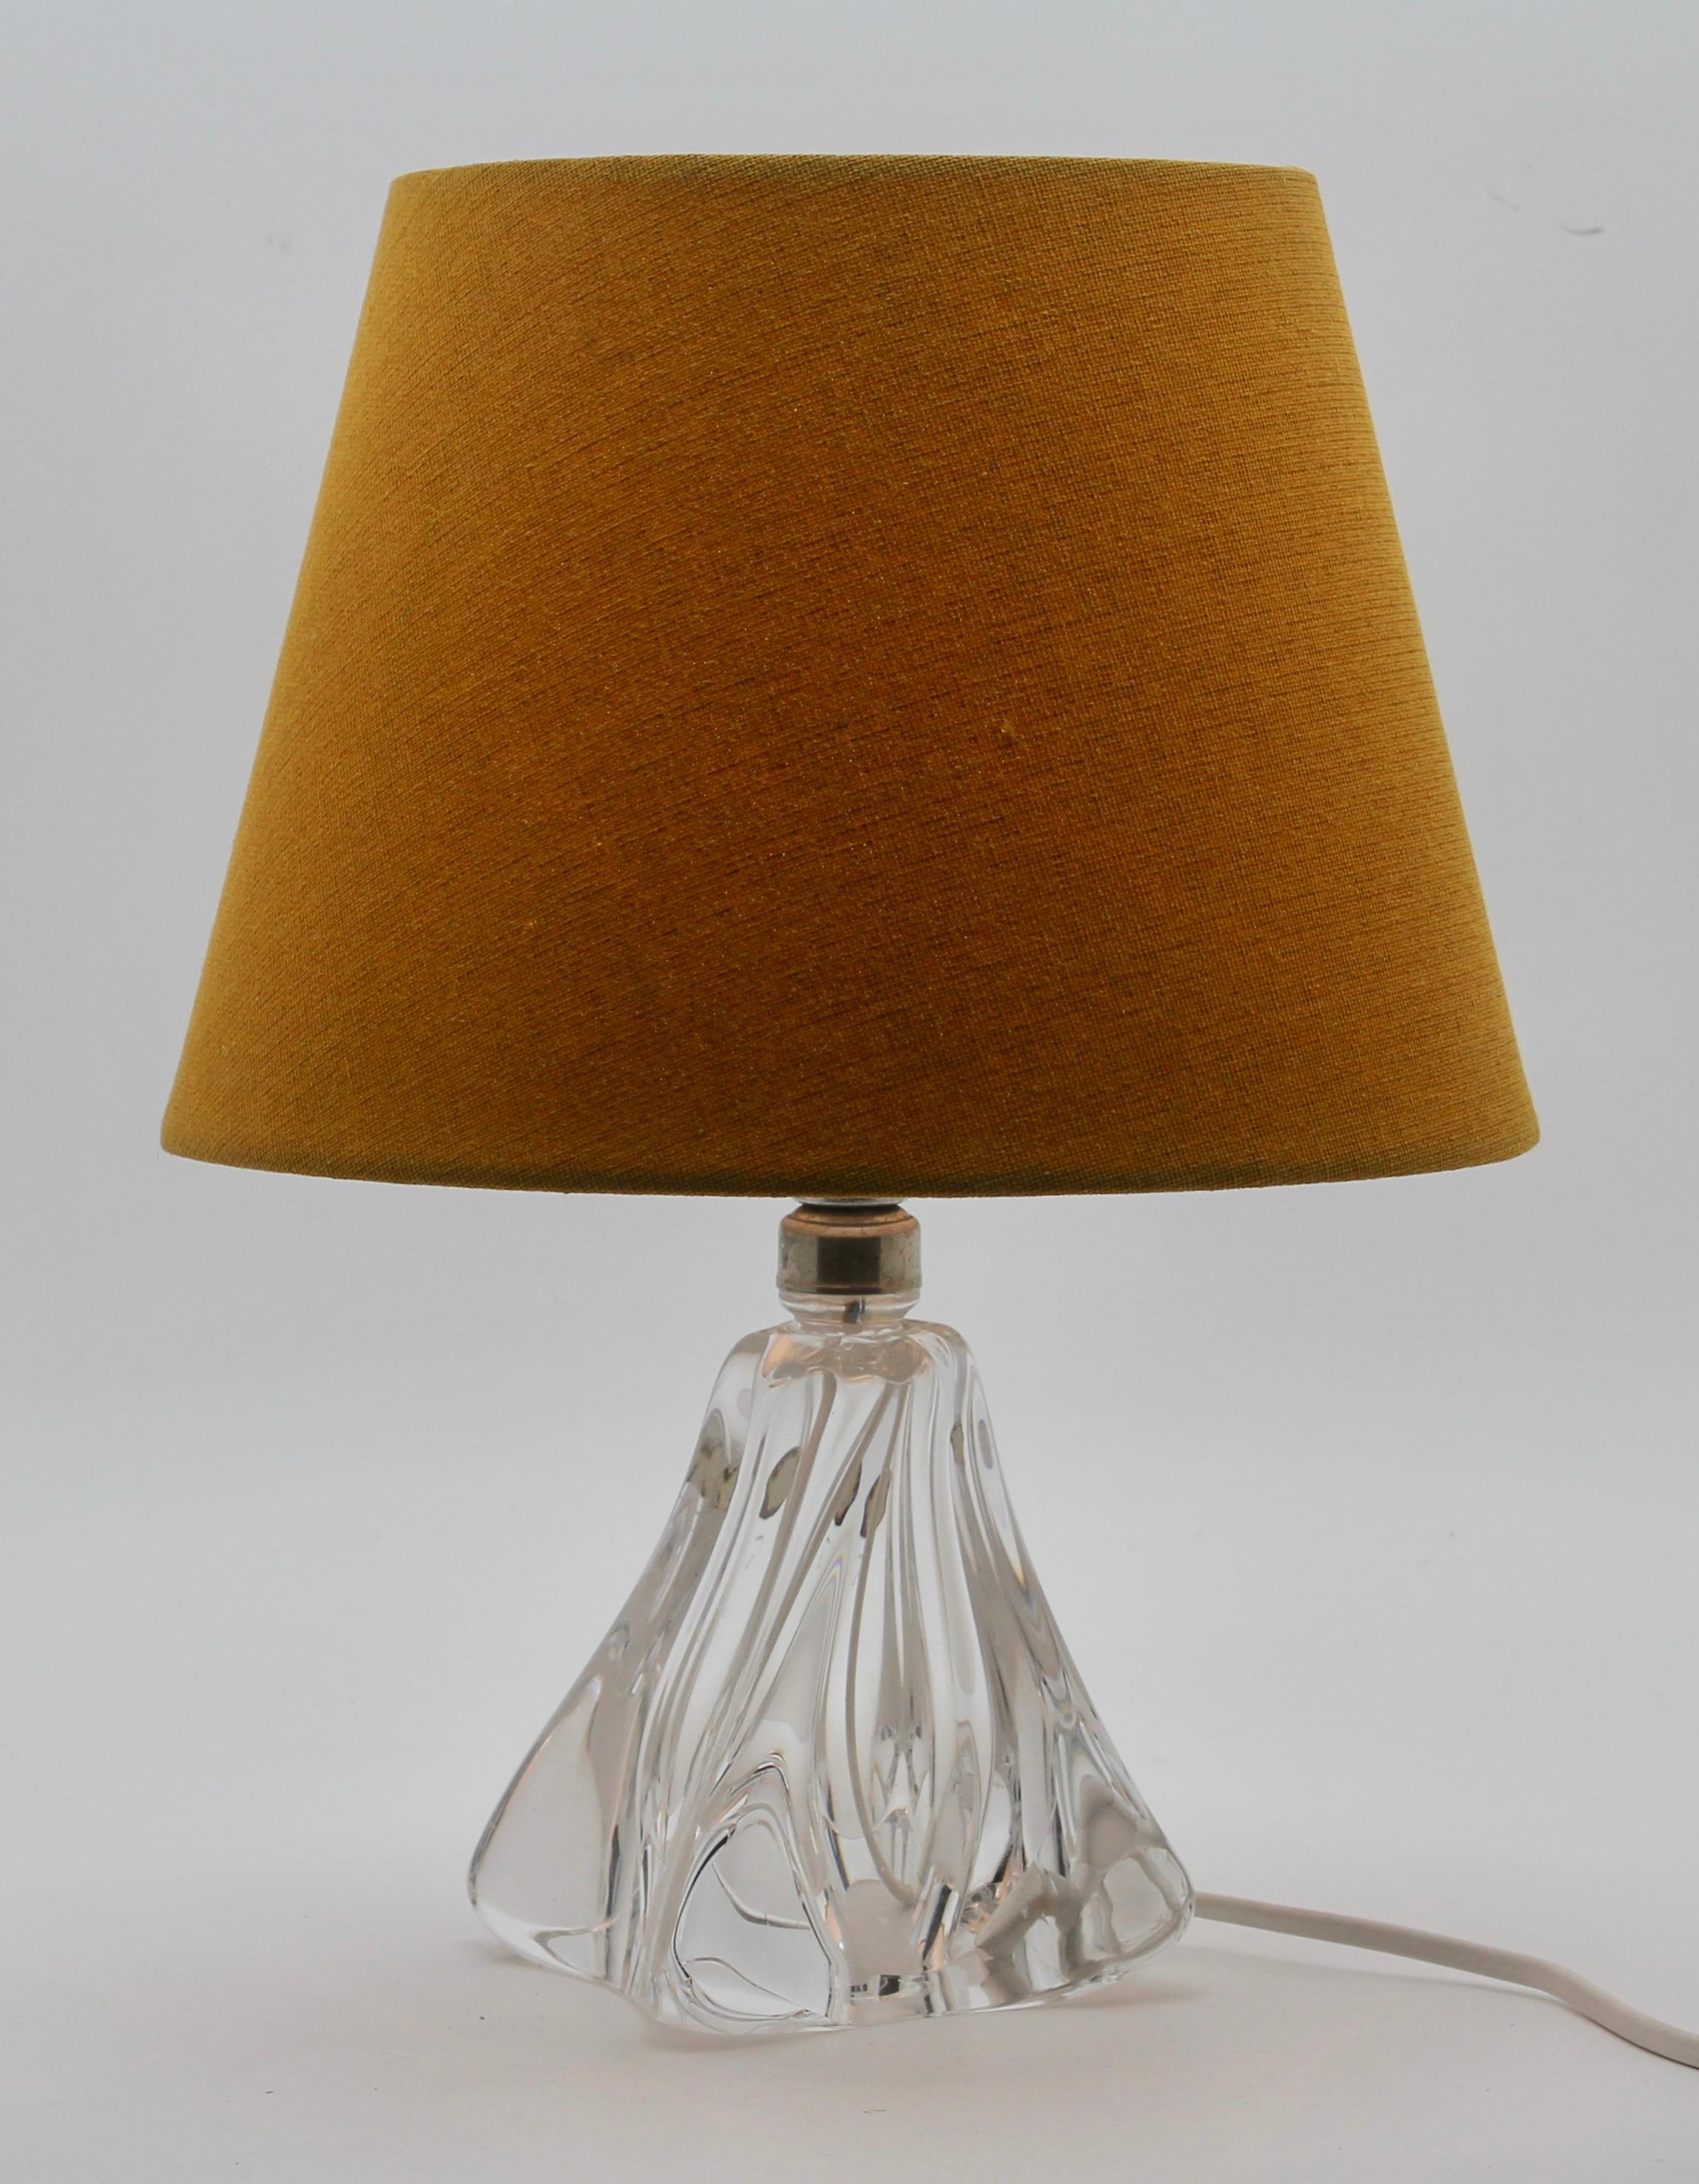 Hand-Crafted Val Saint Lambert Crystal Table Lamp, with Label, Excellent Condition